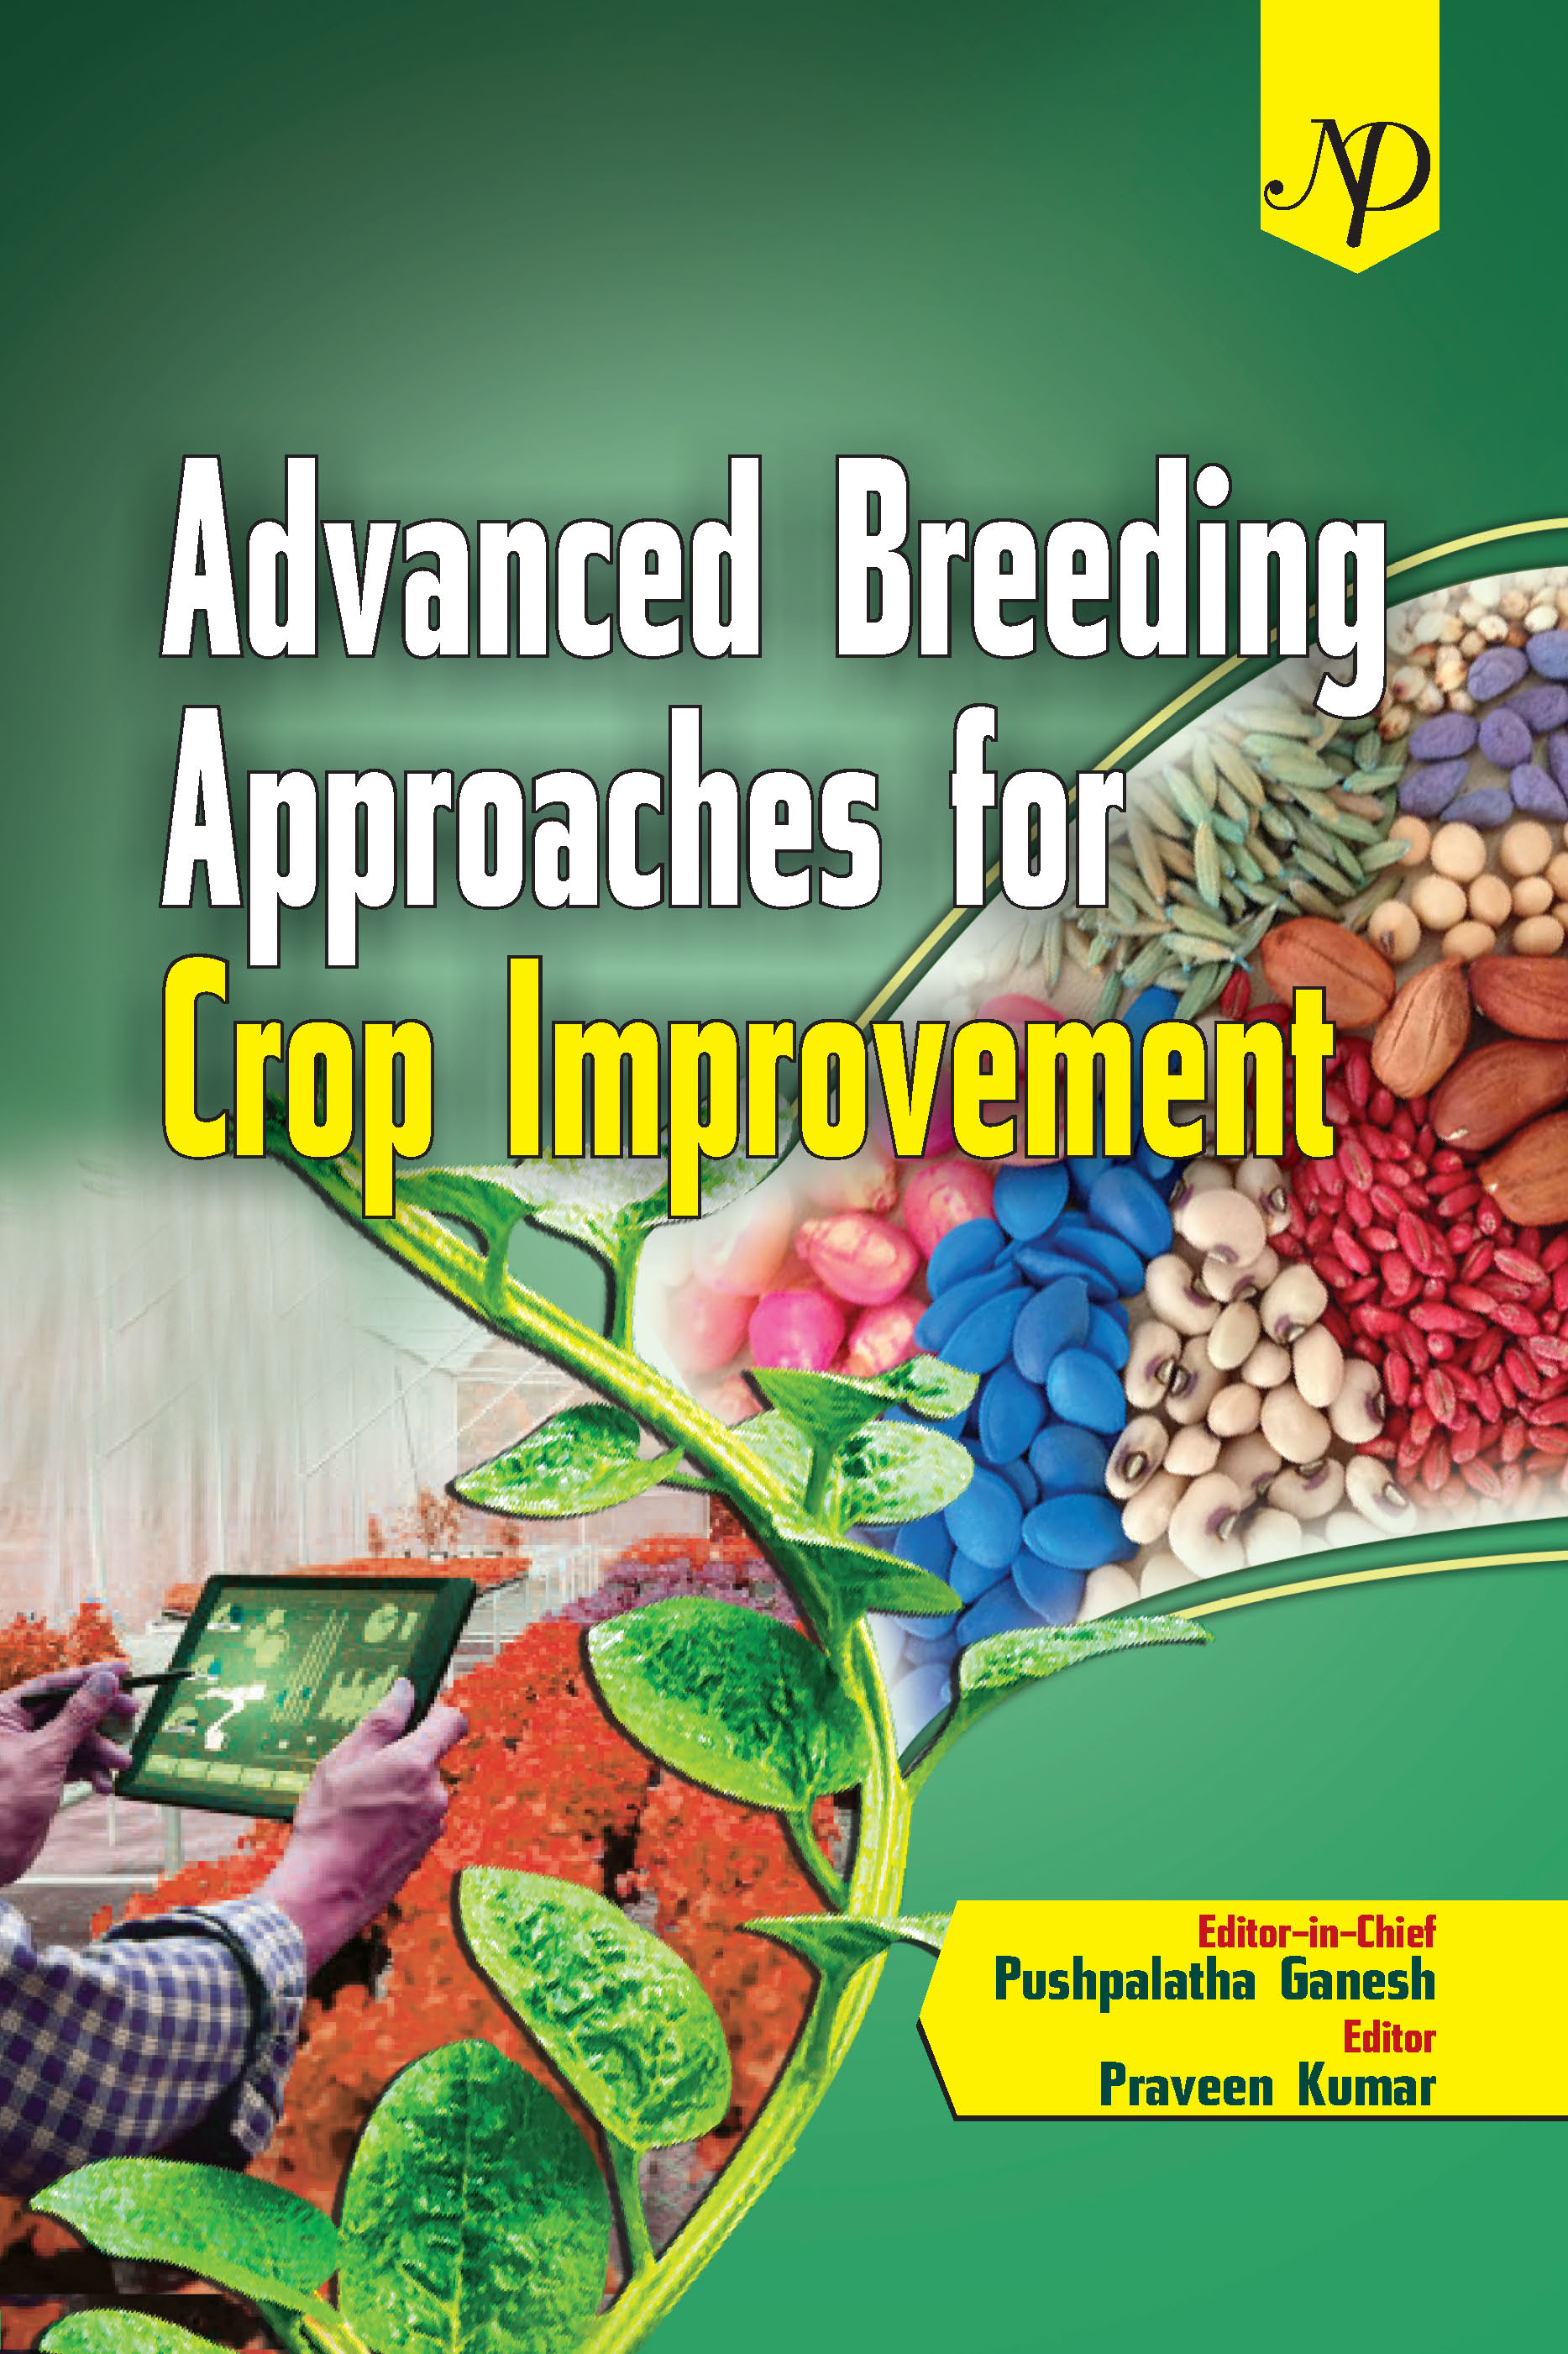 Advanced Breeding Approaches for Crop Improvement Cover.jpg